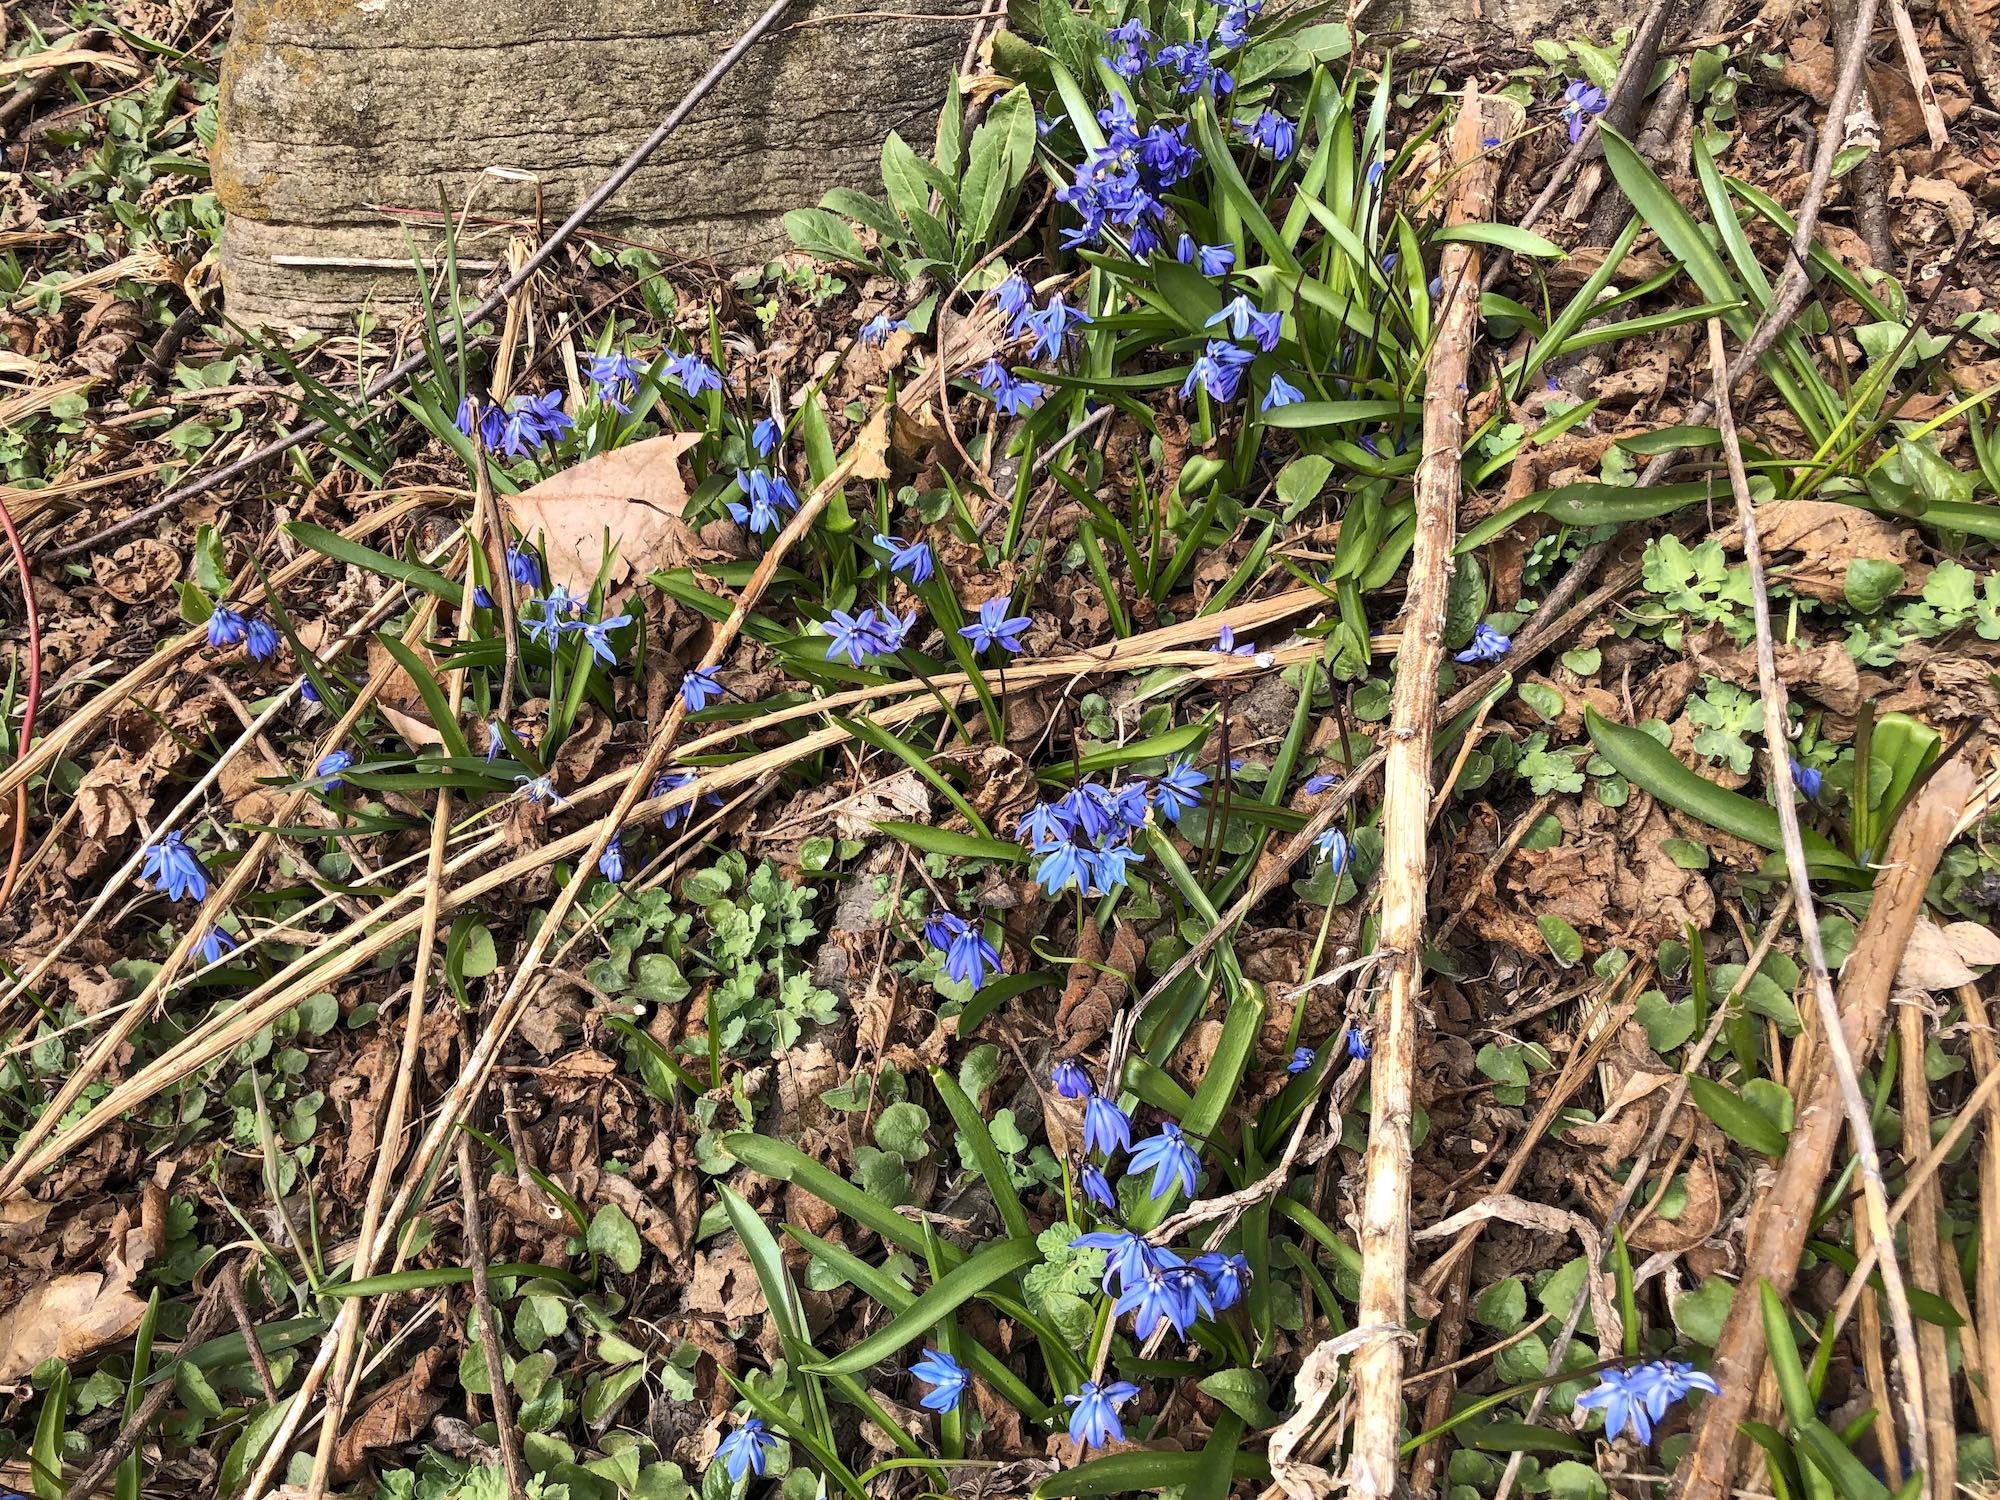 Siberian Squill by Duck Pond on April 1, 2019.